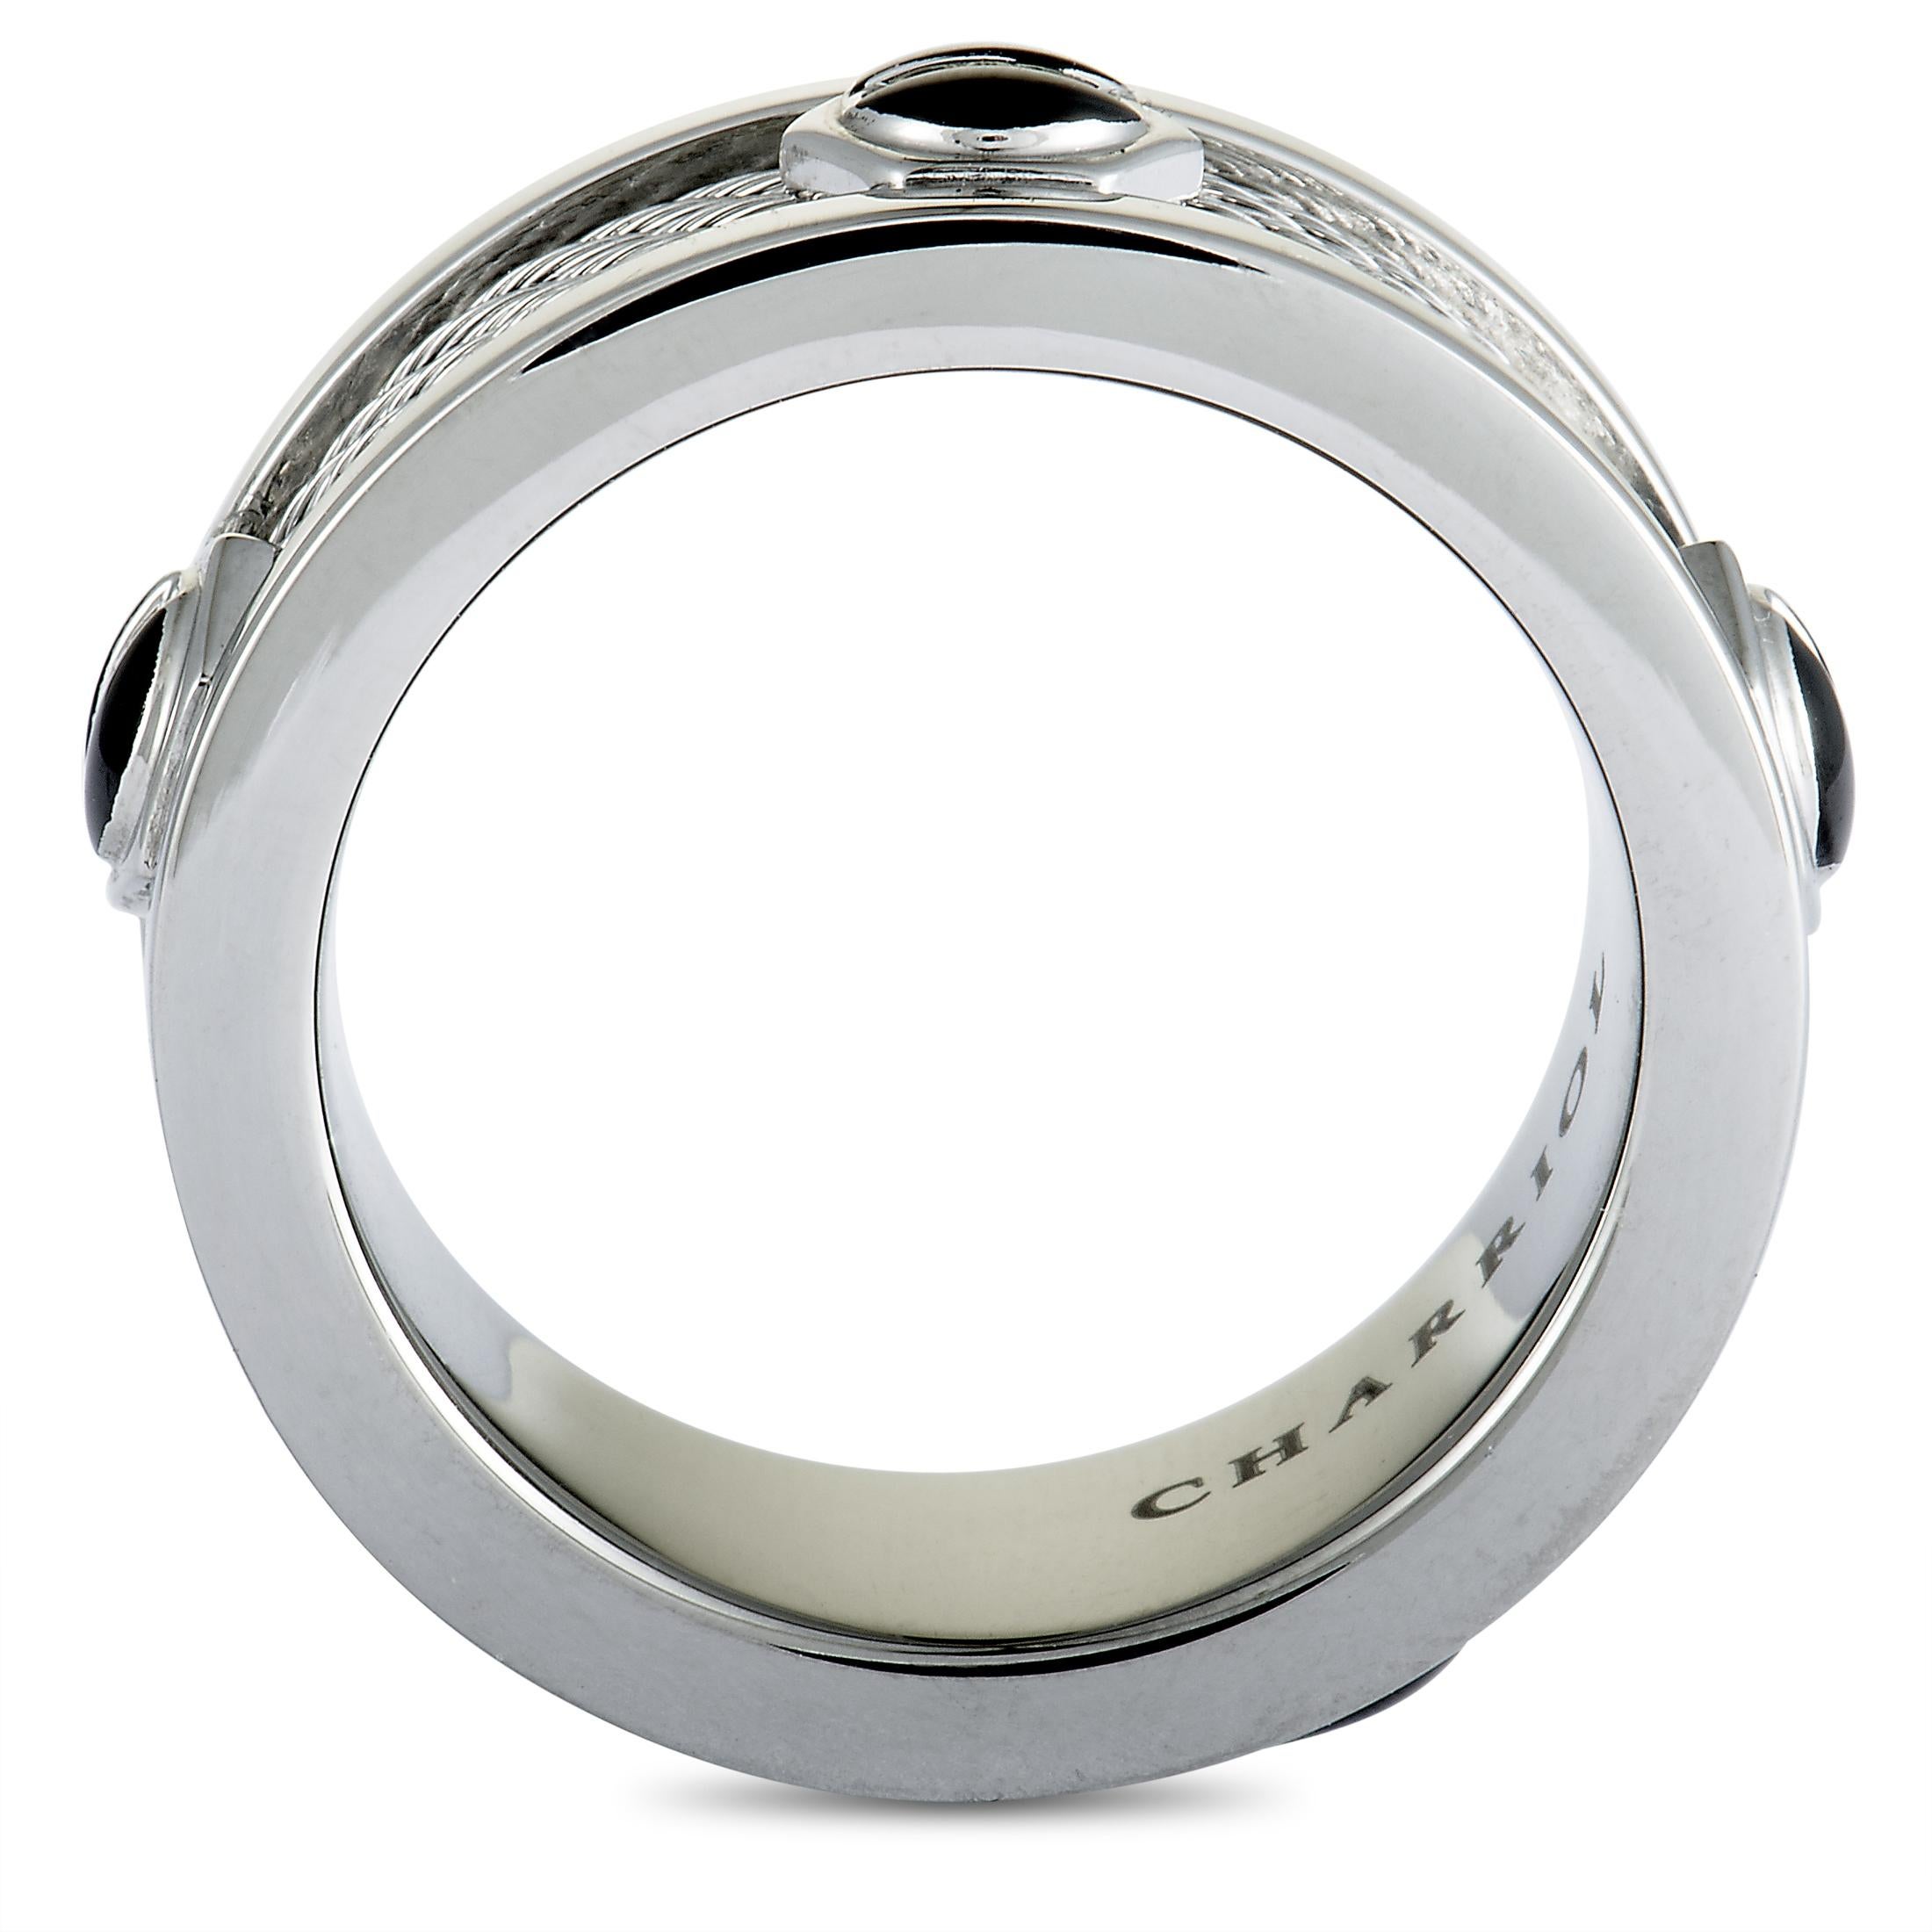 This superb “Forever” ring from Charriol is an exceptional fusion of striking black PVD-coated screw motifs and the brand’s famous cable motif, and it offers an attractively offbeat look. The ring is made of stainless steel and it weighs 12.5 grams.
